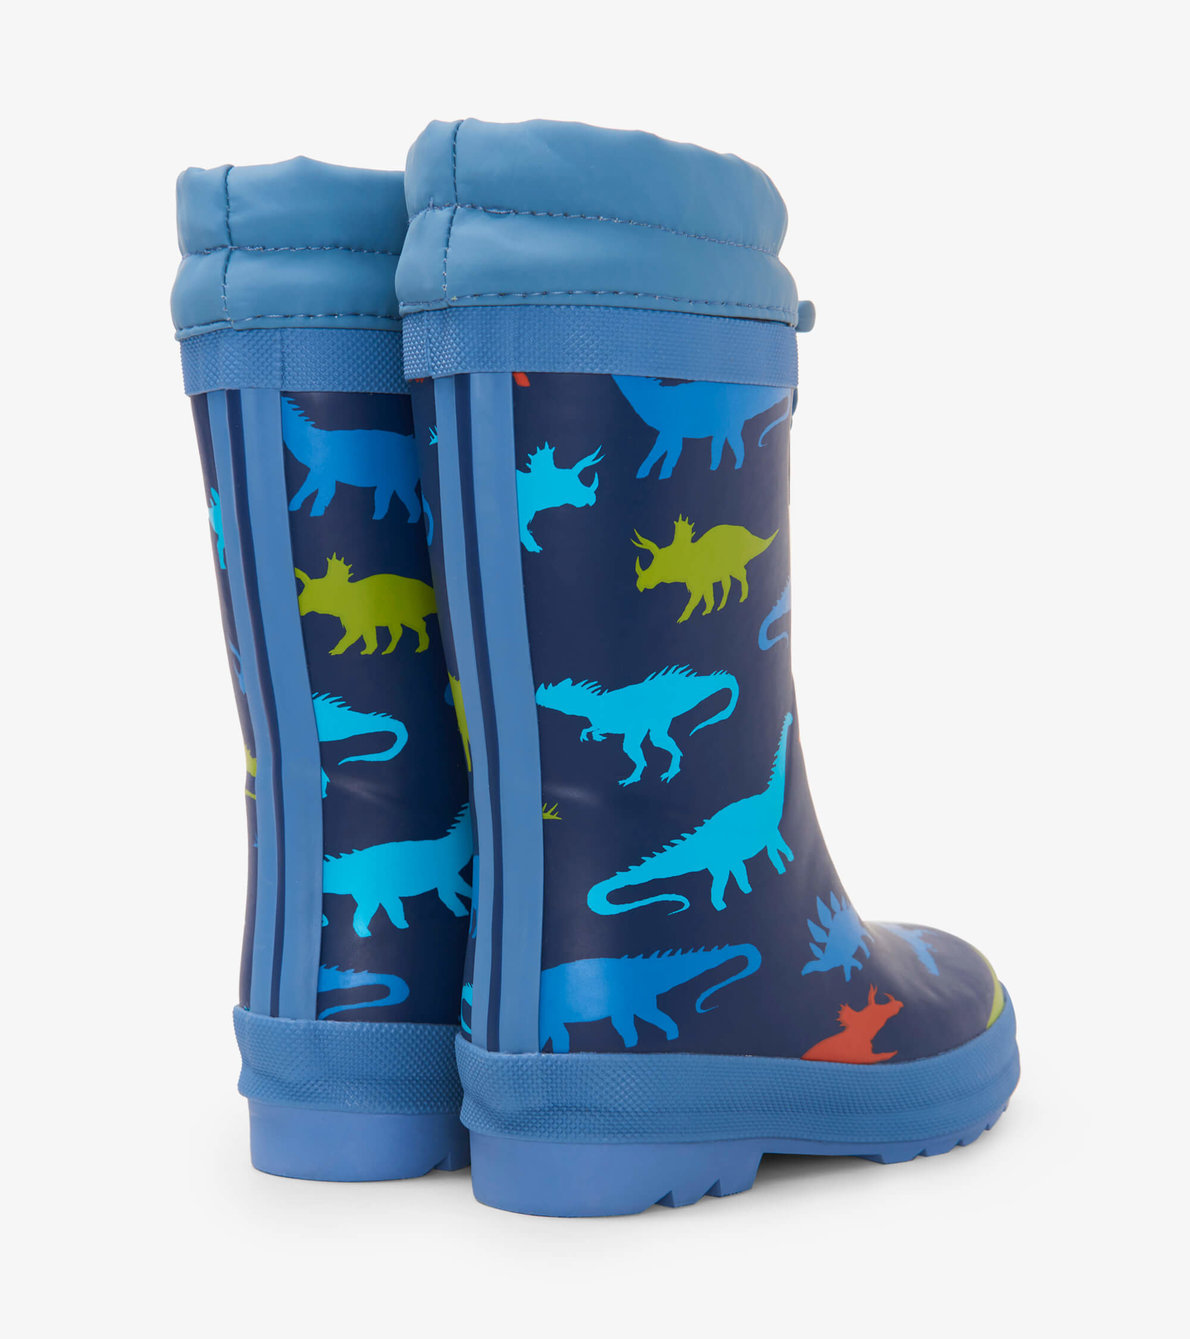 View larger image of Dinosaur Silhouettes Sherpa Lined Baby Rain Boots